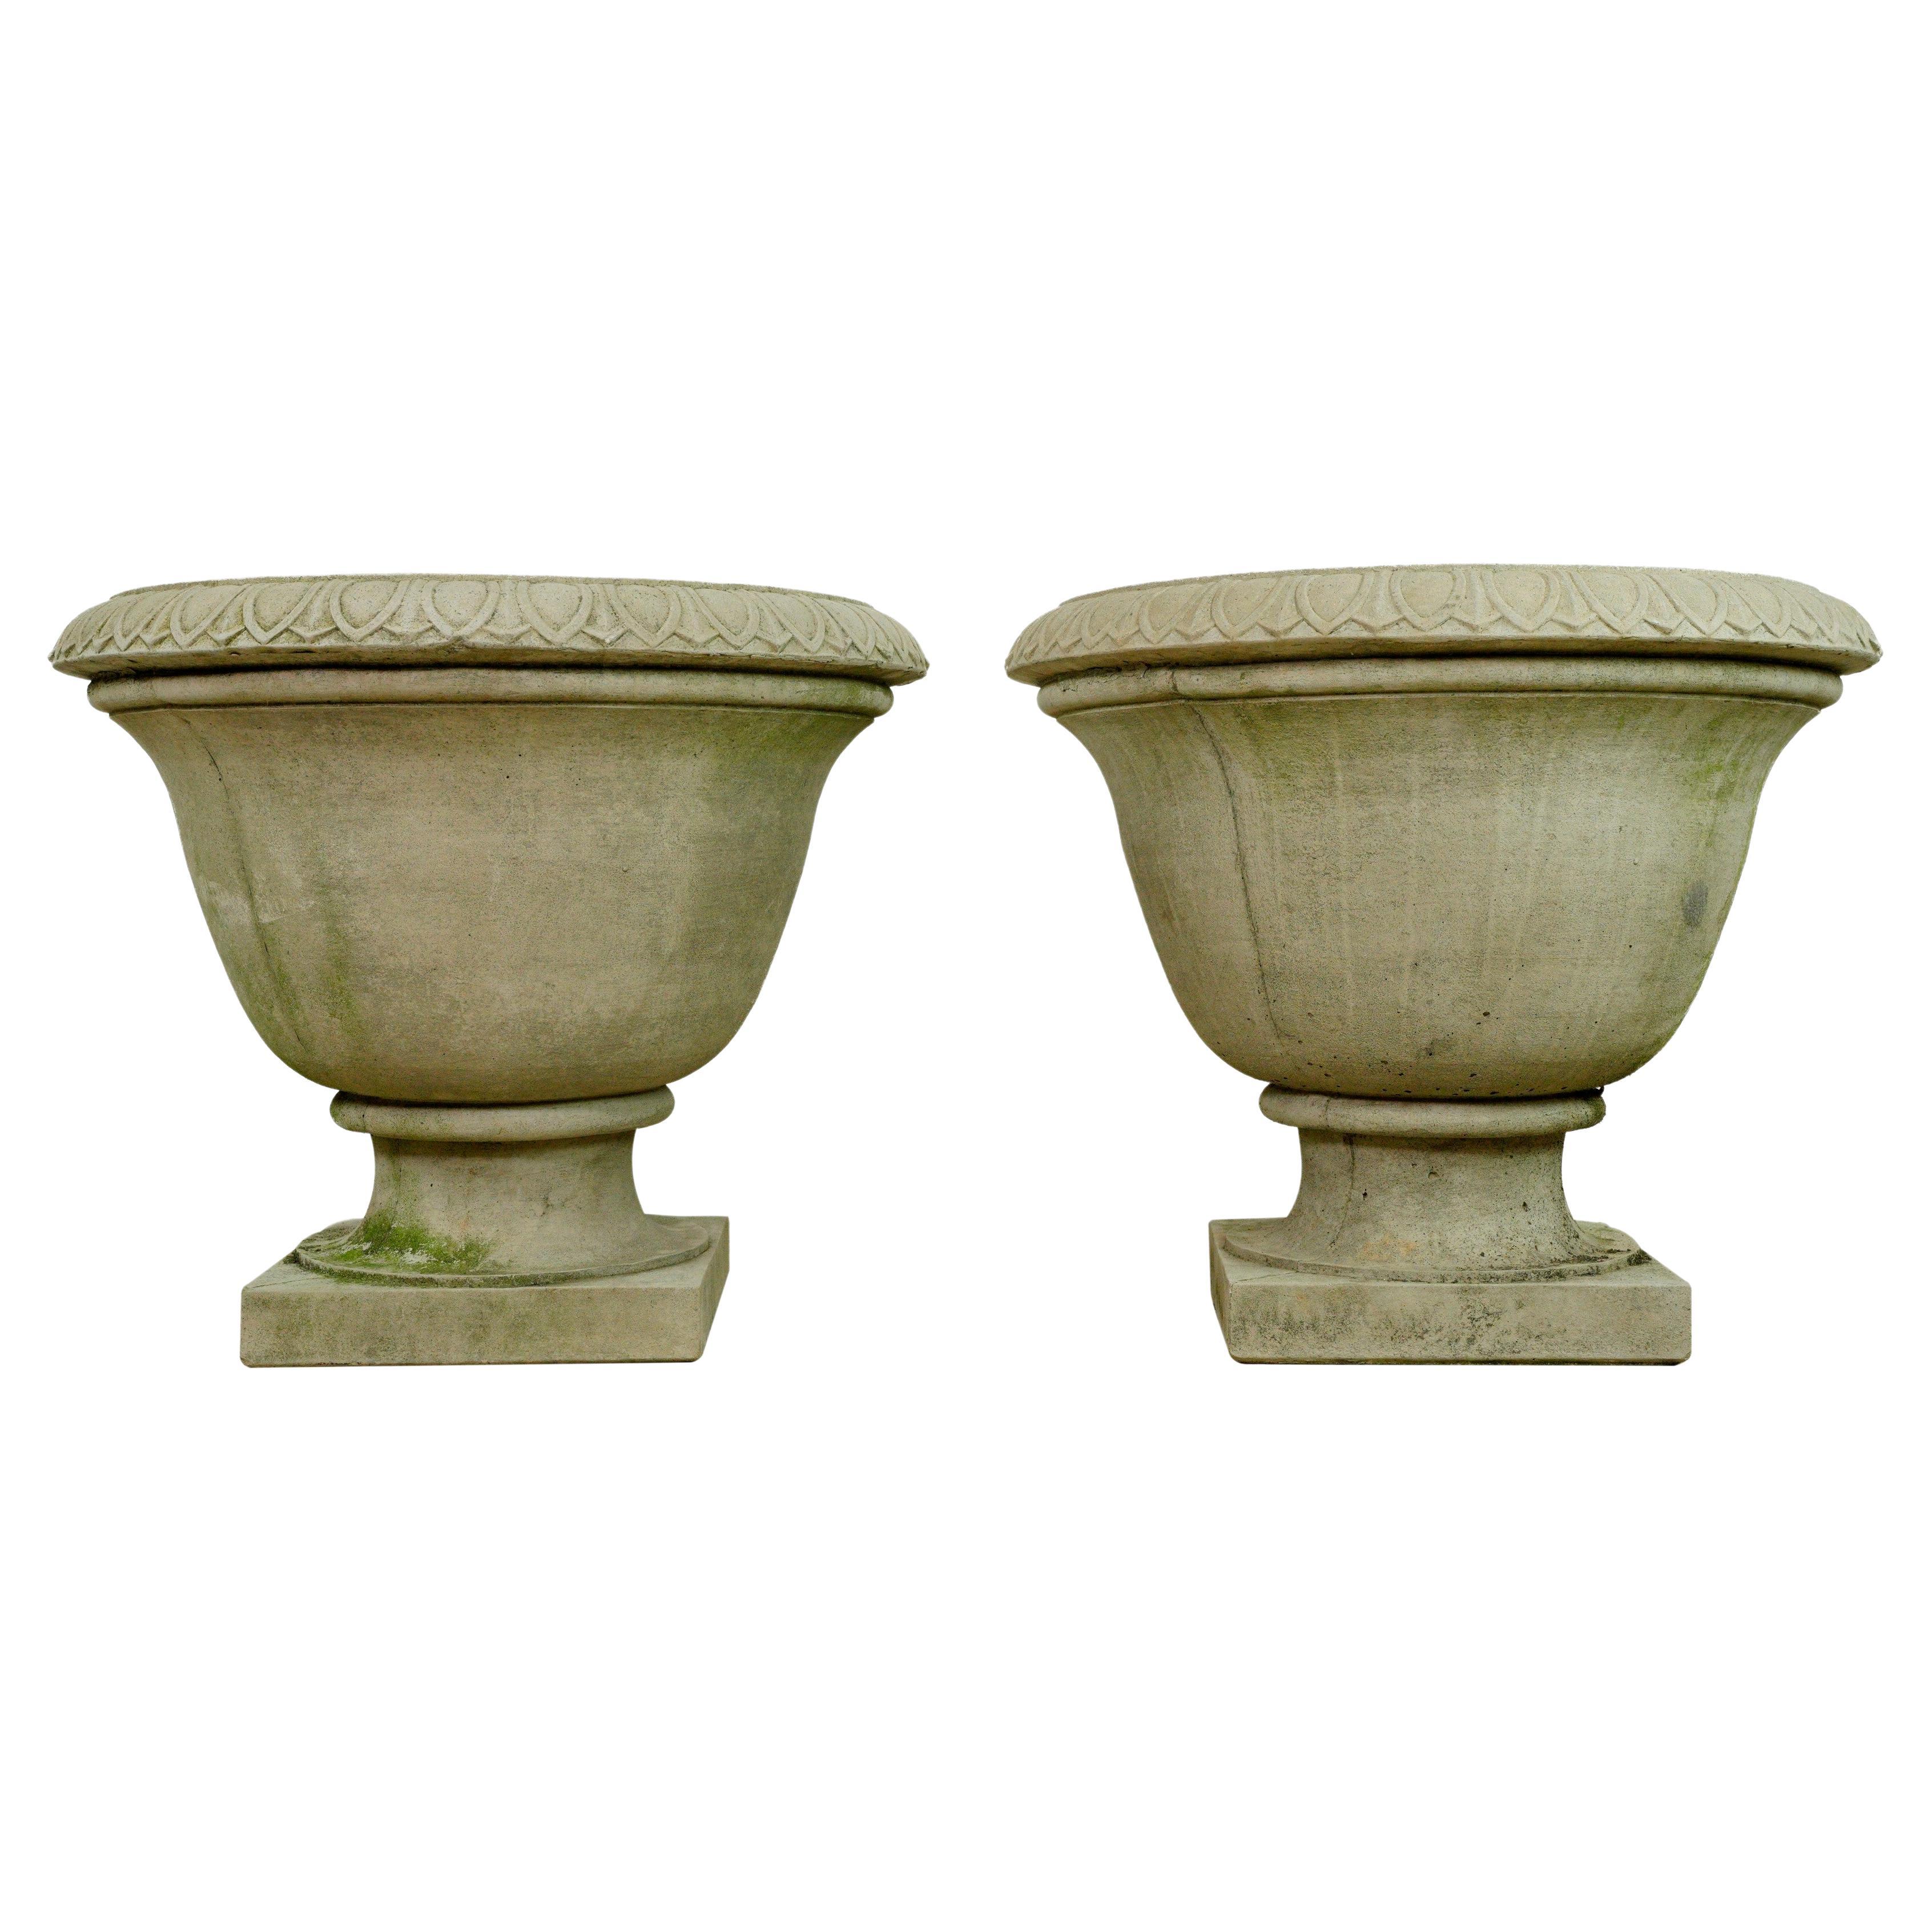 Pair 26.75 in. Egg & Dart Trim Urn Shaped Garden Planters For Sale